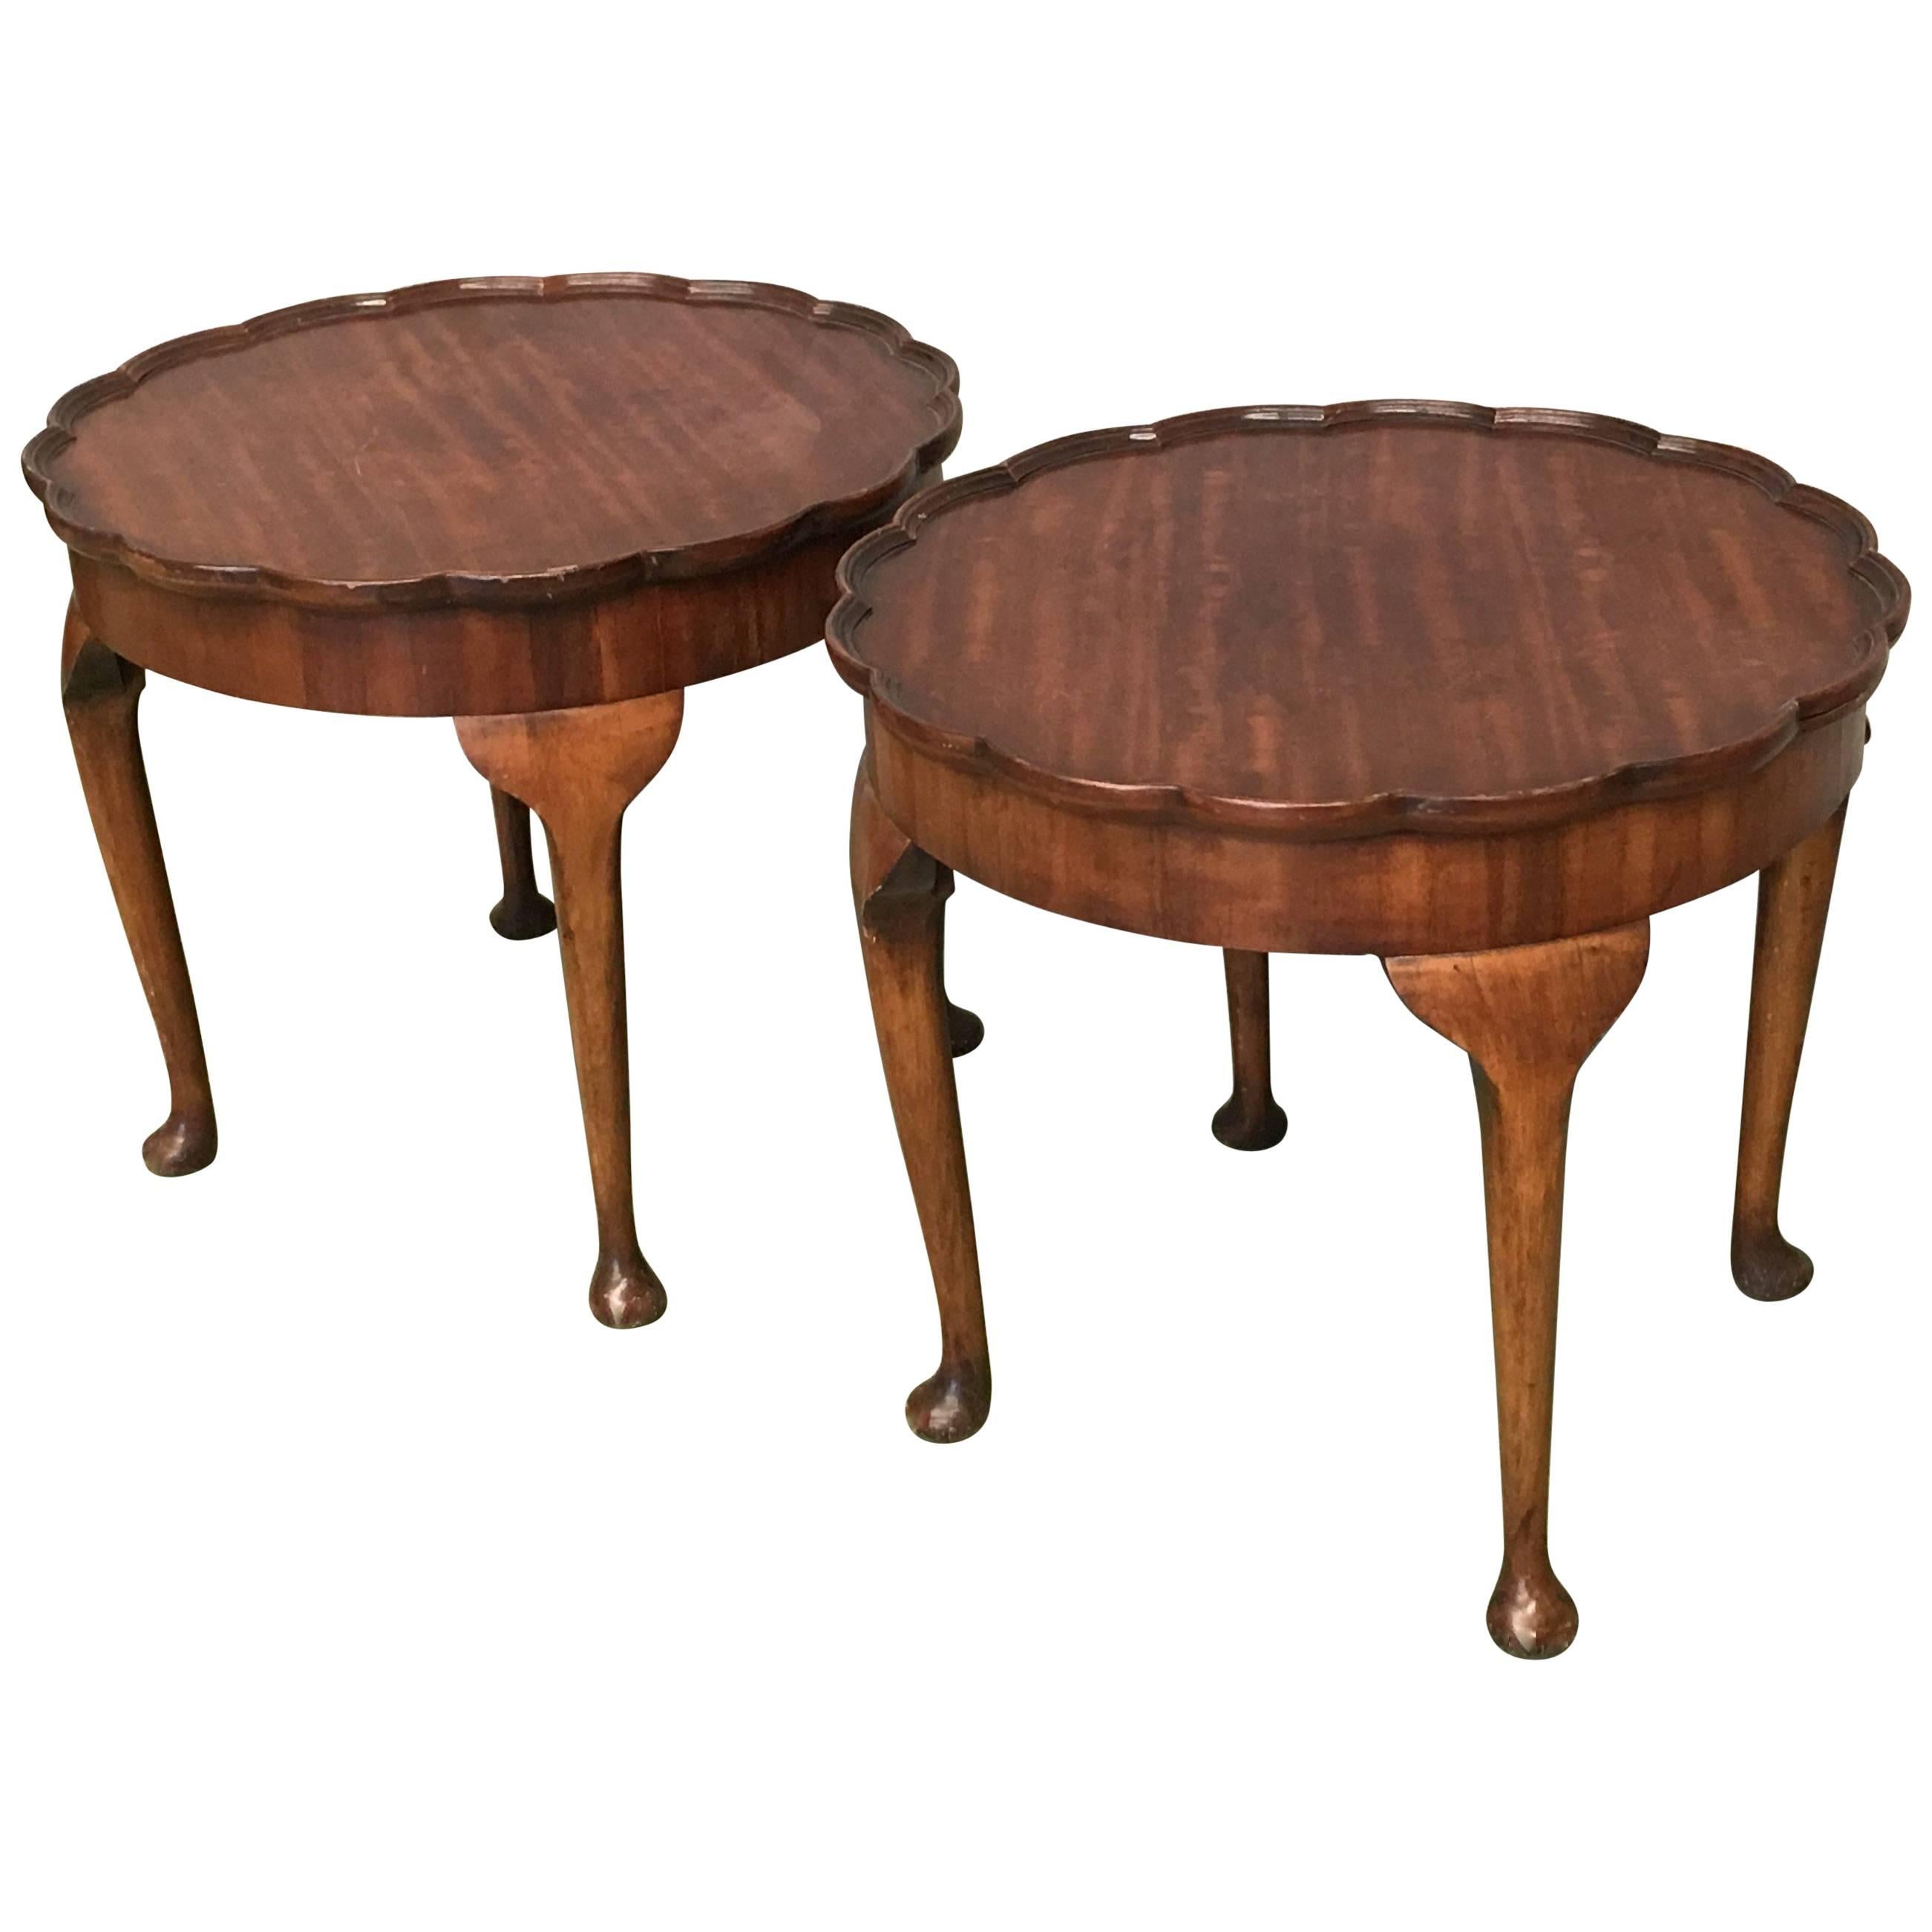 19th Century Pair of Side Salon Tables with Piecrust Fleur Top in Walnut